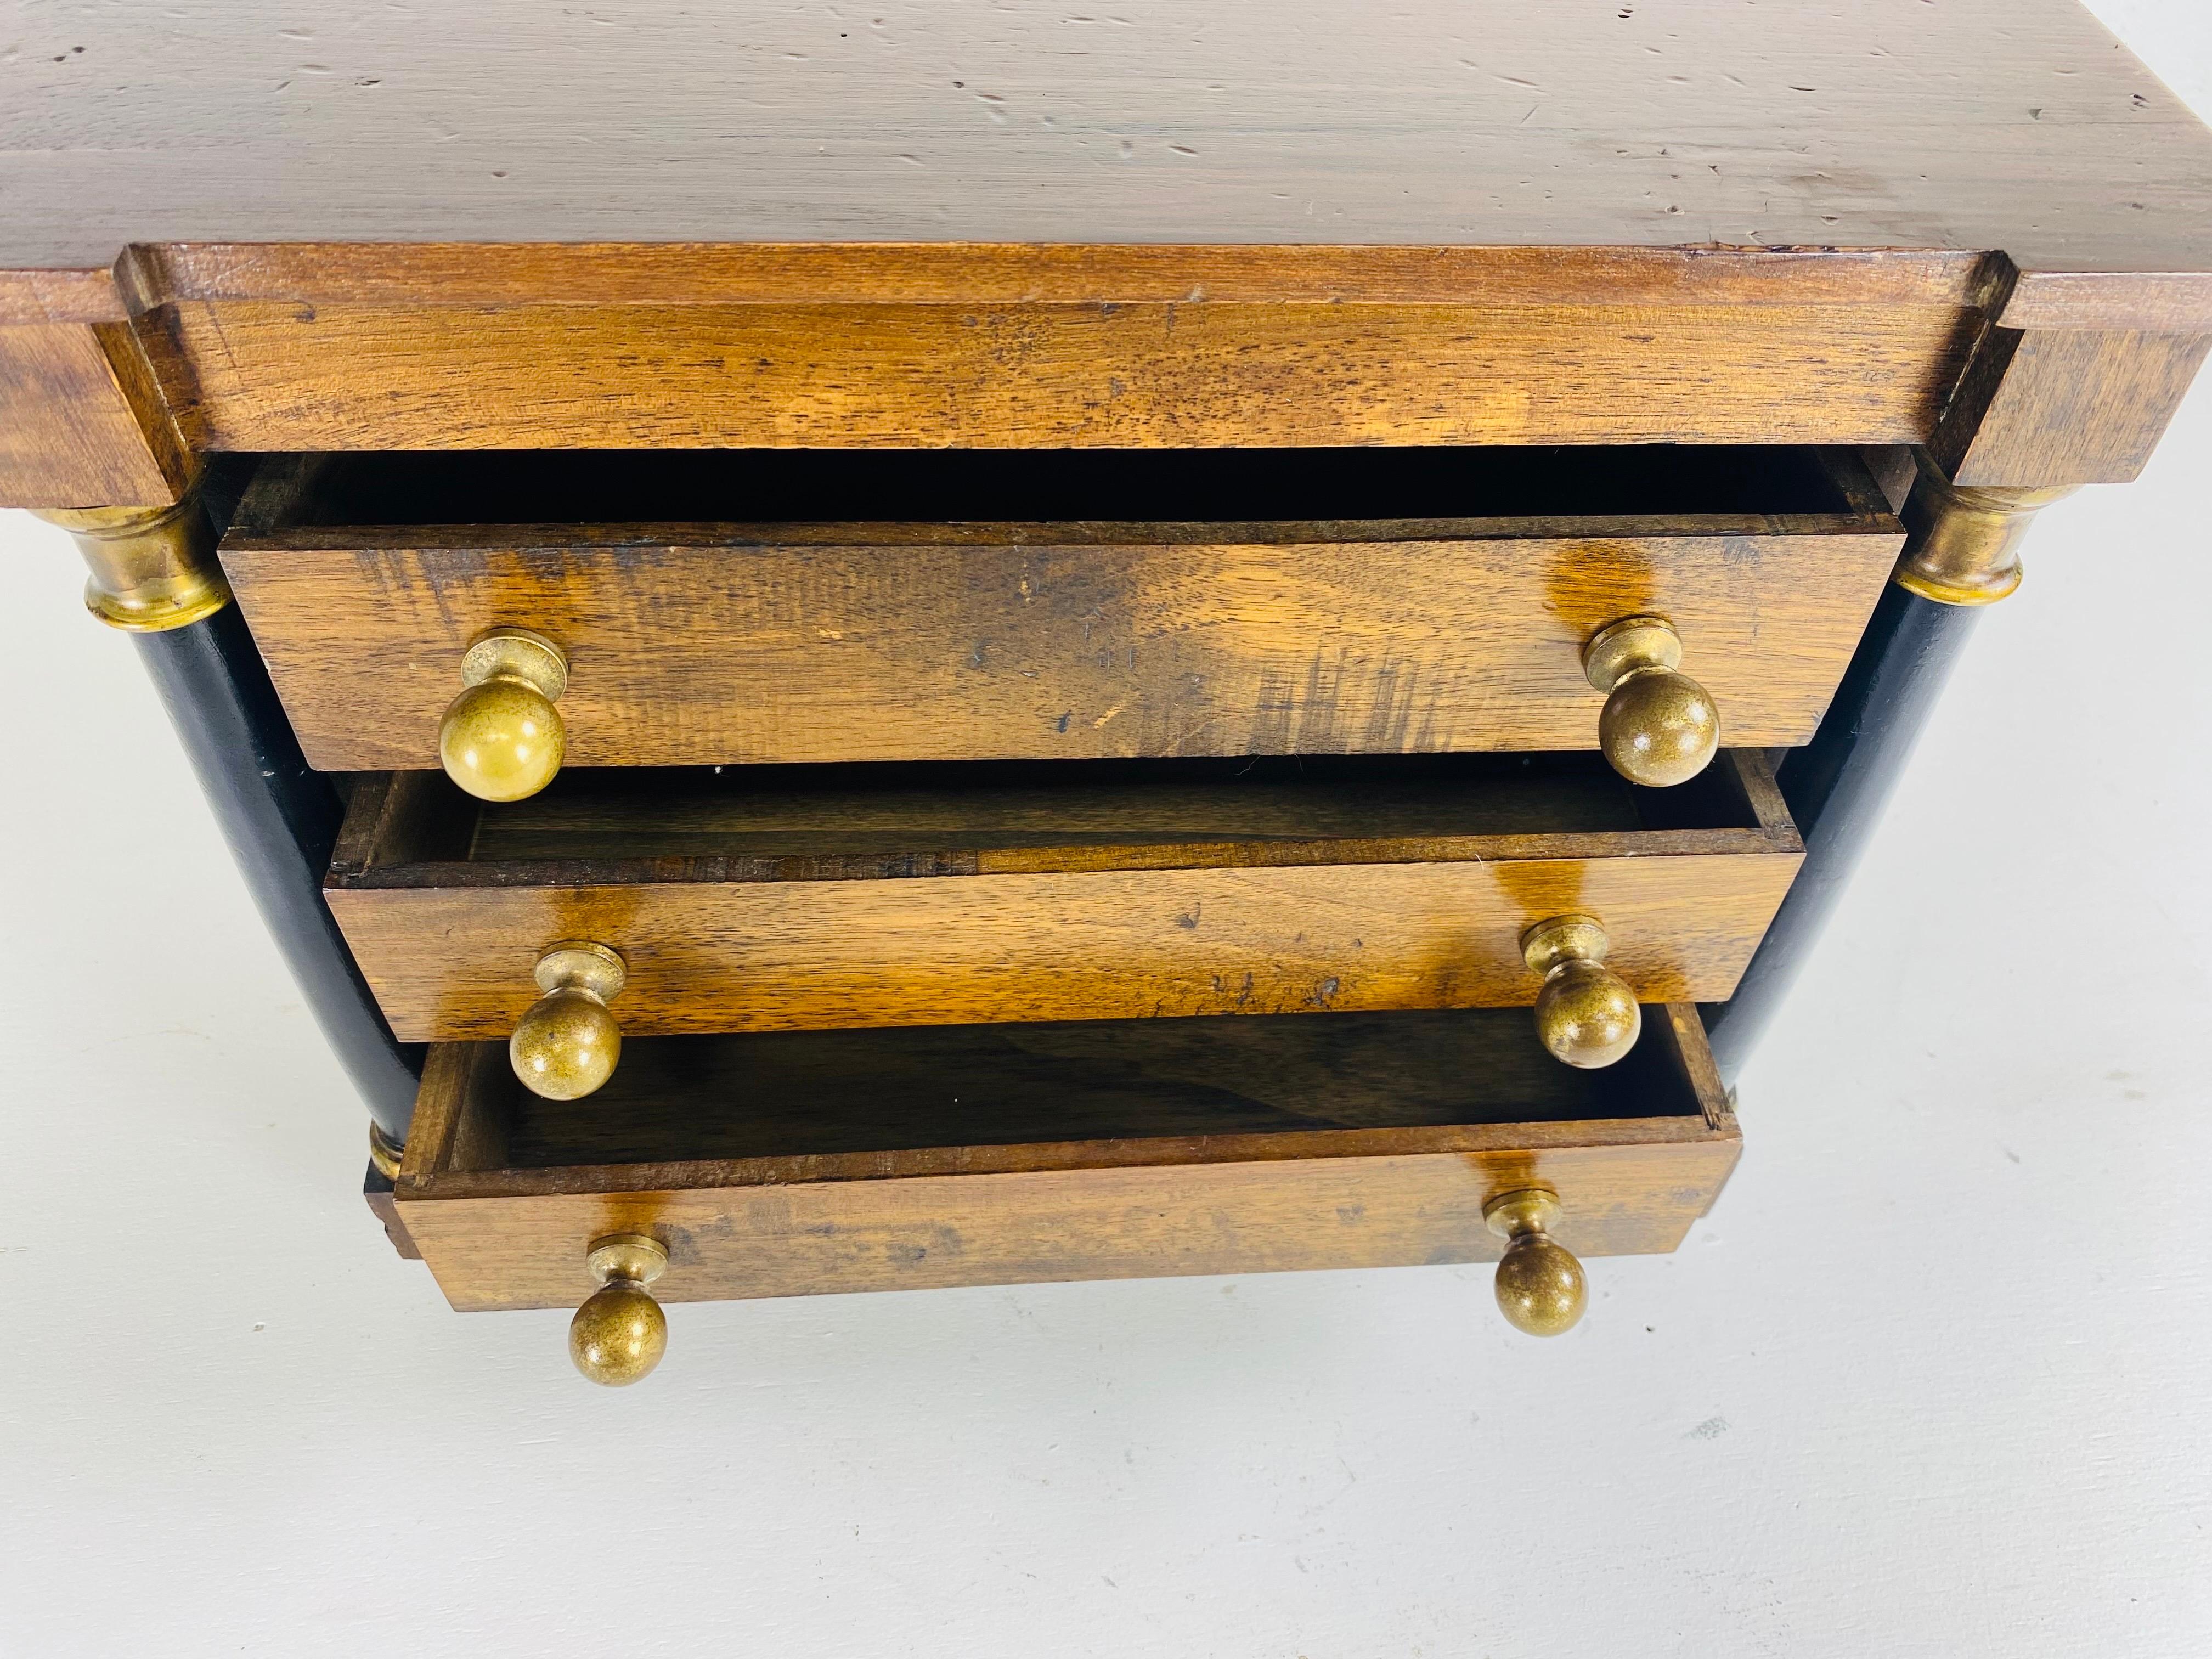 This is a Vintage empire style jewelry or trinkets chest of drawers. This chest of drawers features its original solid brass hardware. This diminutive chest of drawers is made of dark walnut with two columns on either side in black. This jewelry